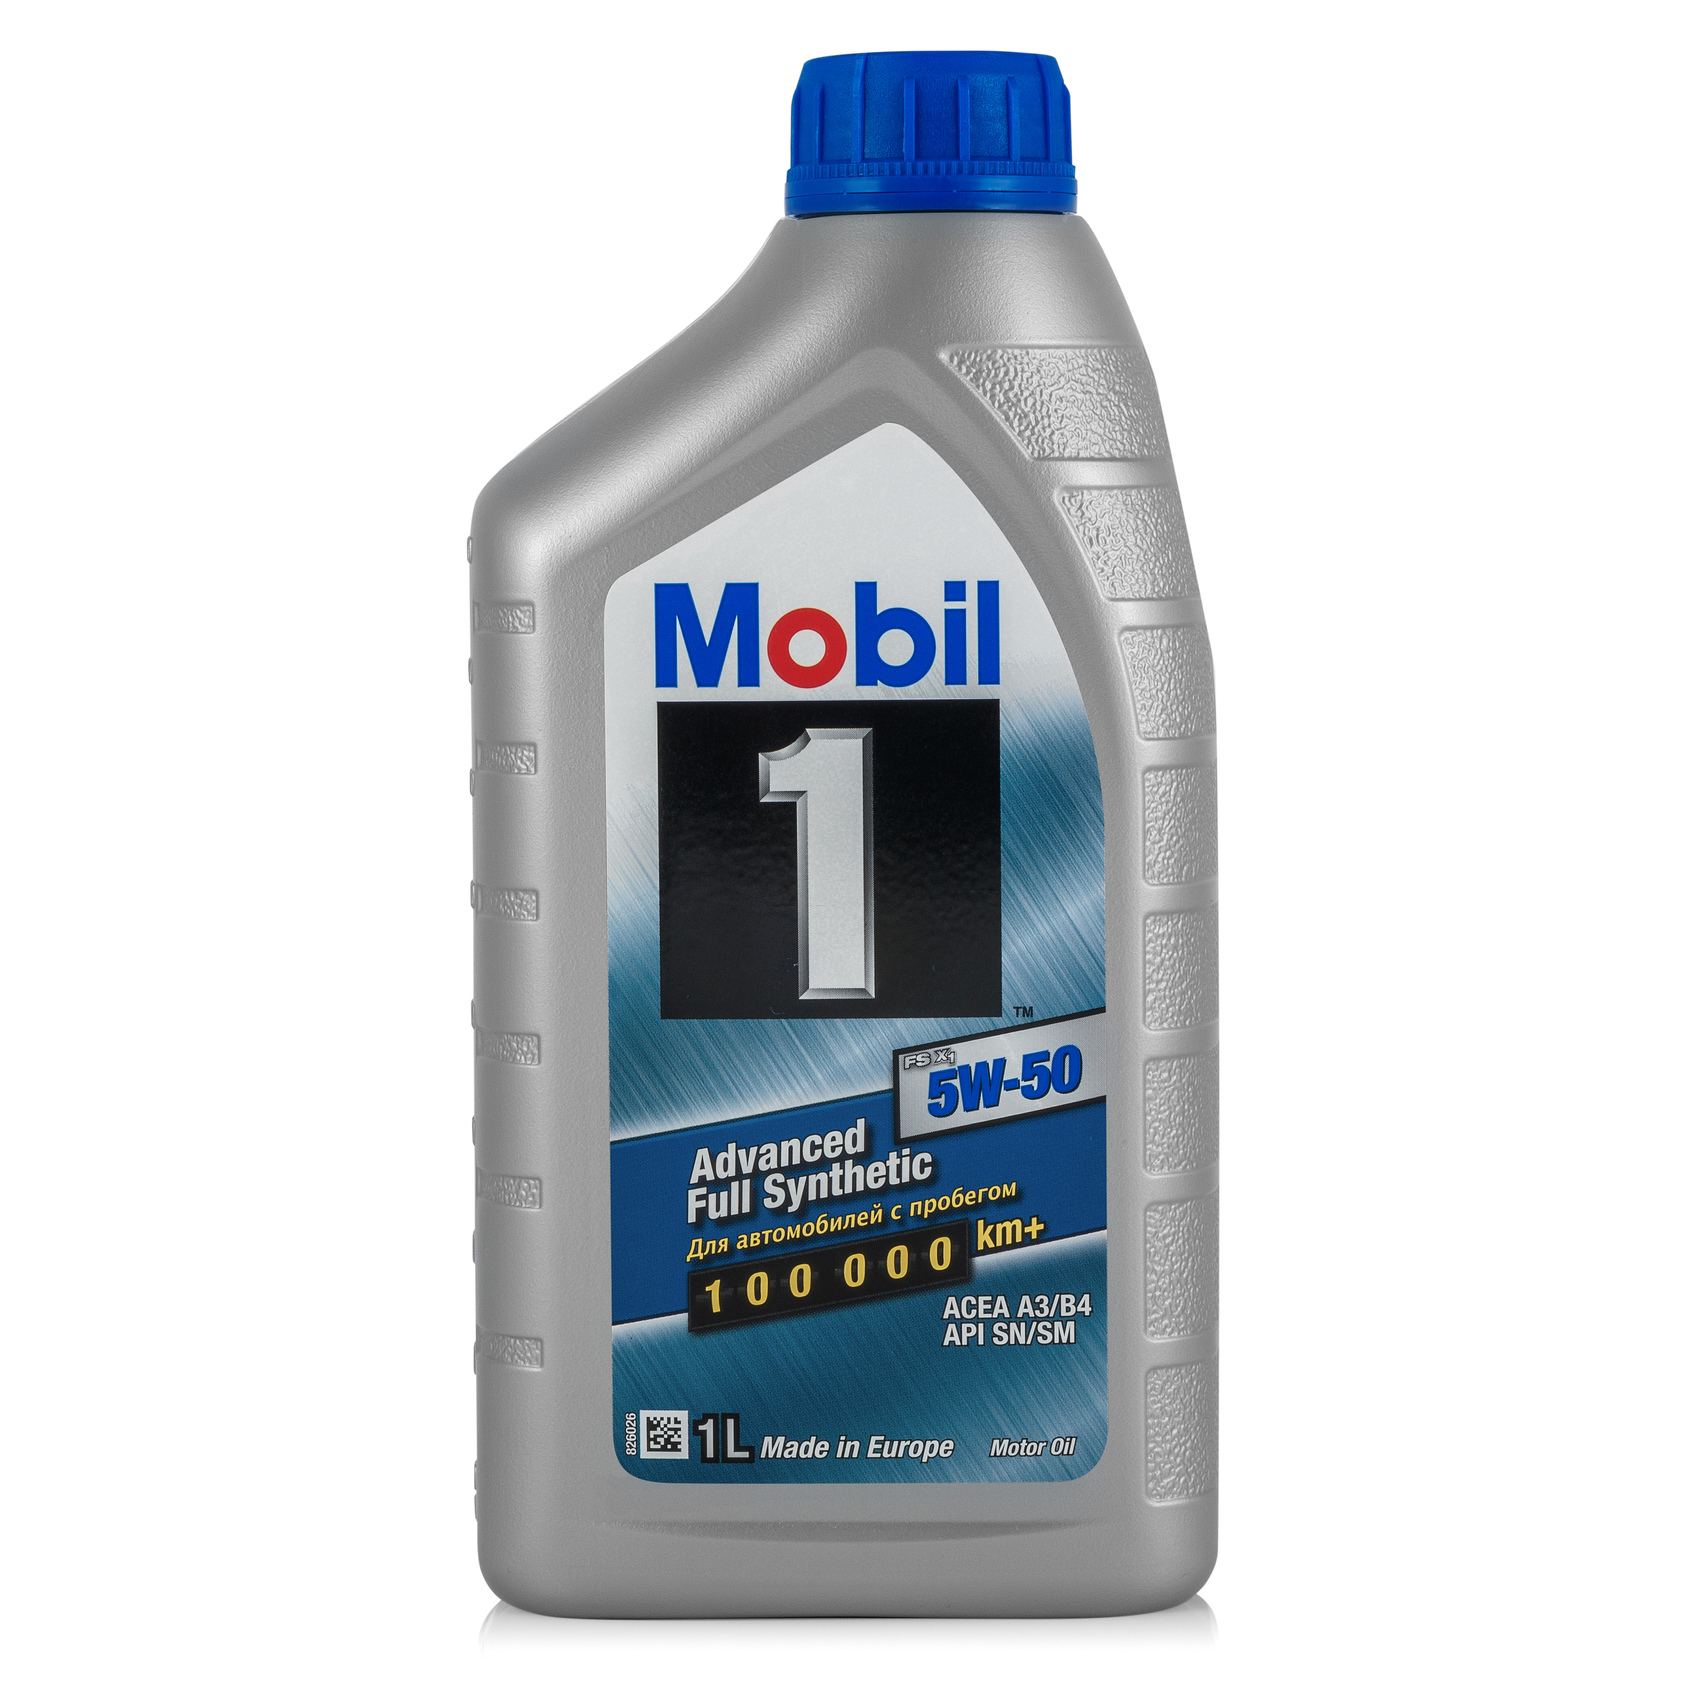 Mobil Engine oil Mobil 1 Full Synthetic X1 5W-50, 1L – price 49 PLN